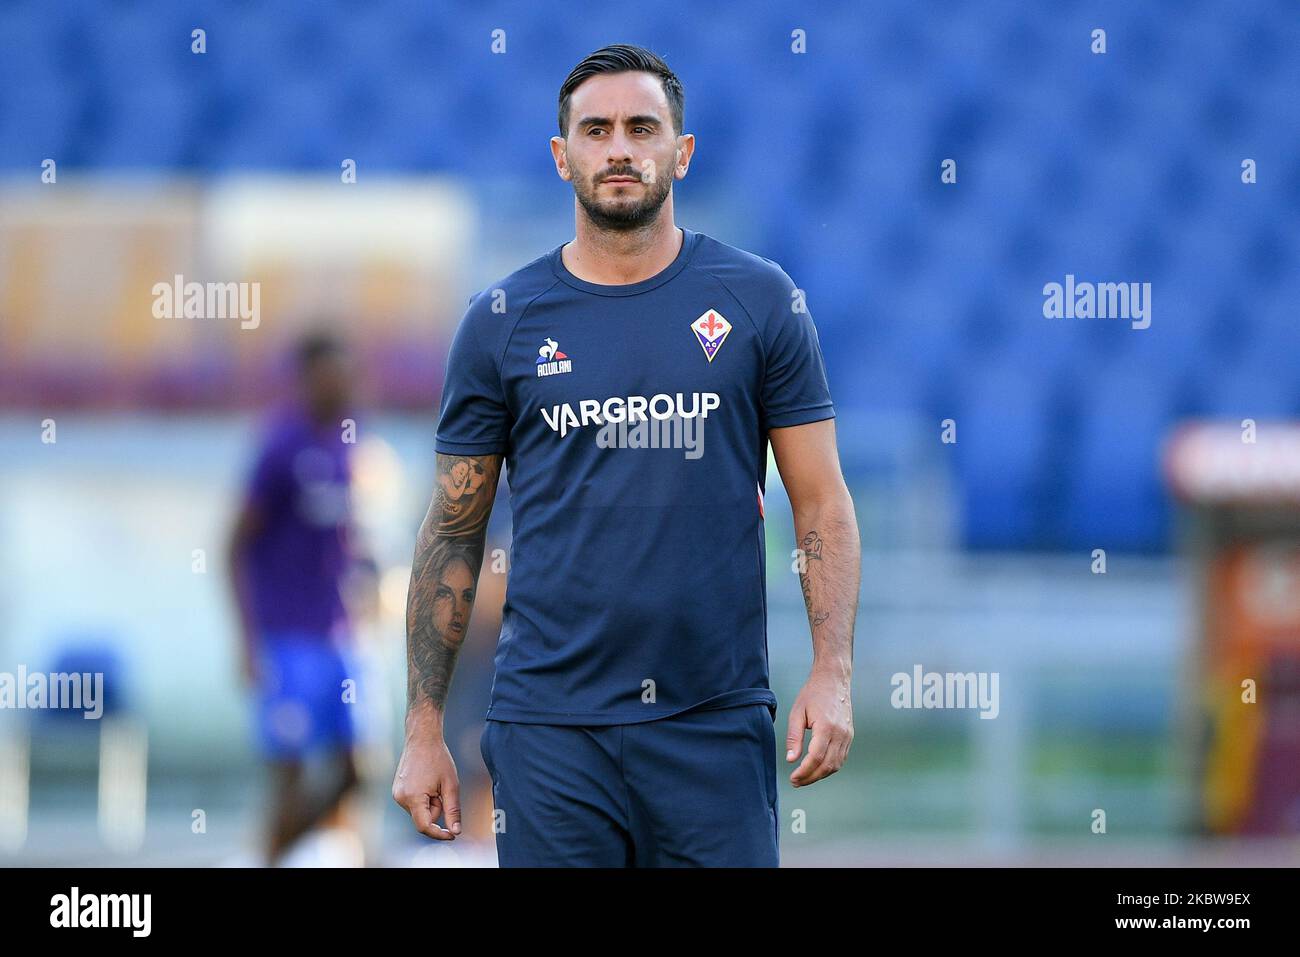 Alberto Aquilani of ACF Fiorentina during the Serie A match between AS Roma and ACF Fiorentina at Stadio Olimpico, Rome, Italy on 26 July 2020. (Photo by Giuseppe Maffia/NurPhoto) Stock Photo